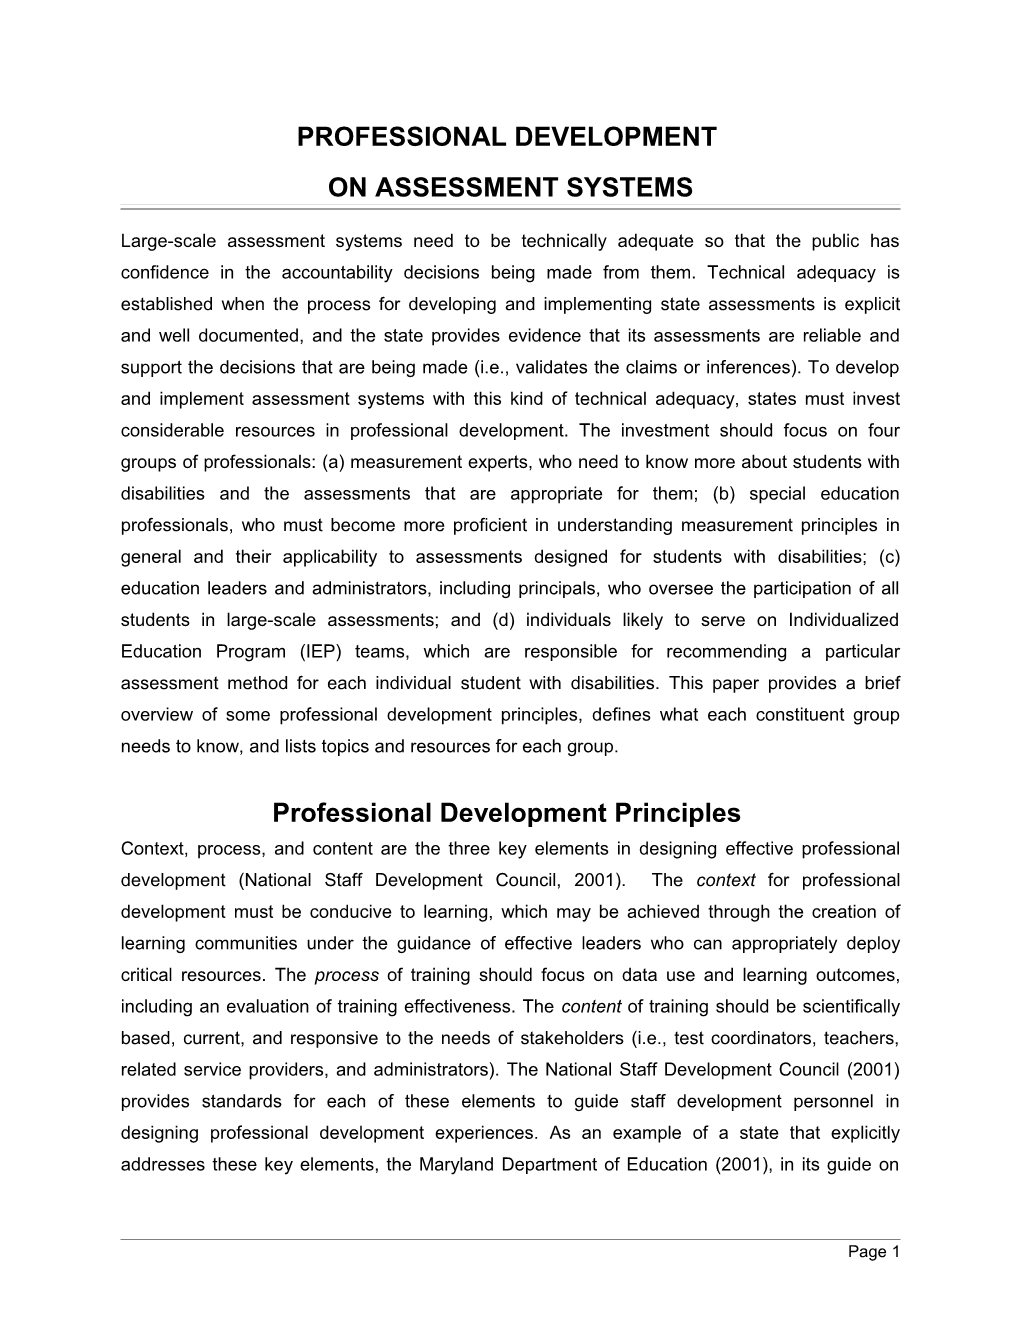 Professional Development on Assessment Systems December 2005 (Msword)